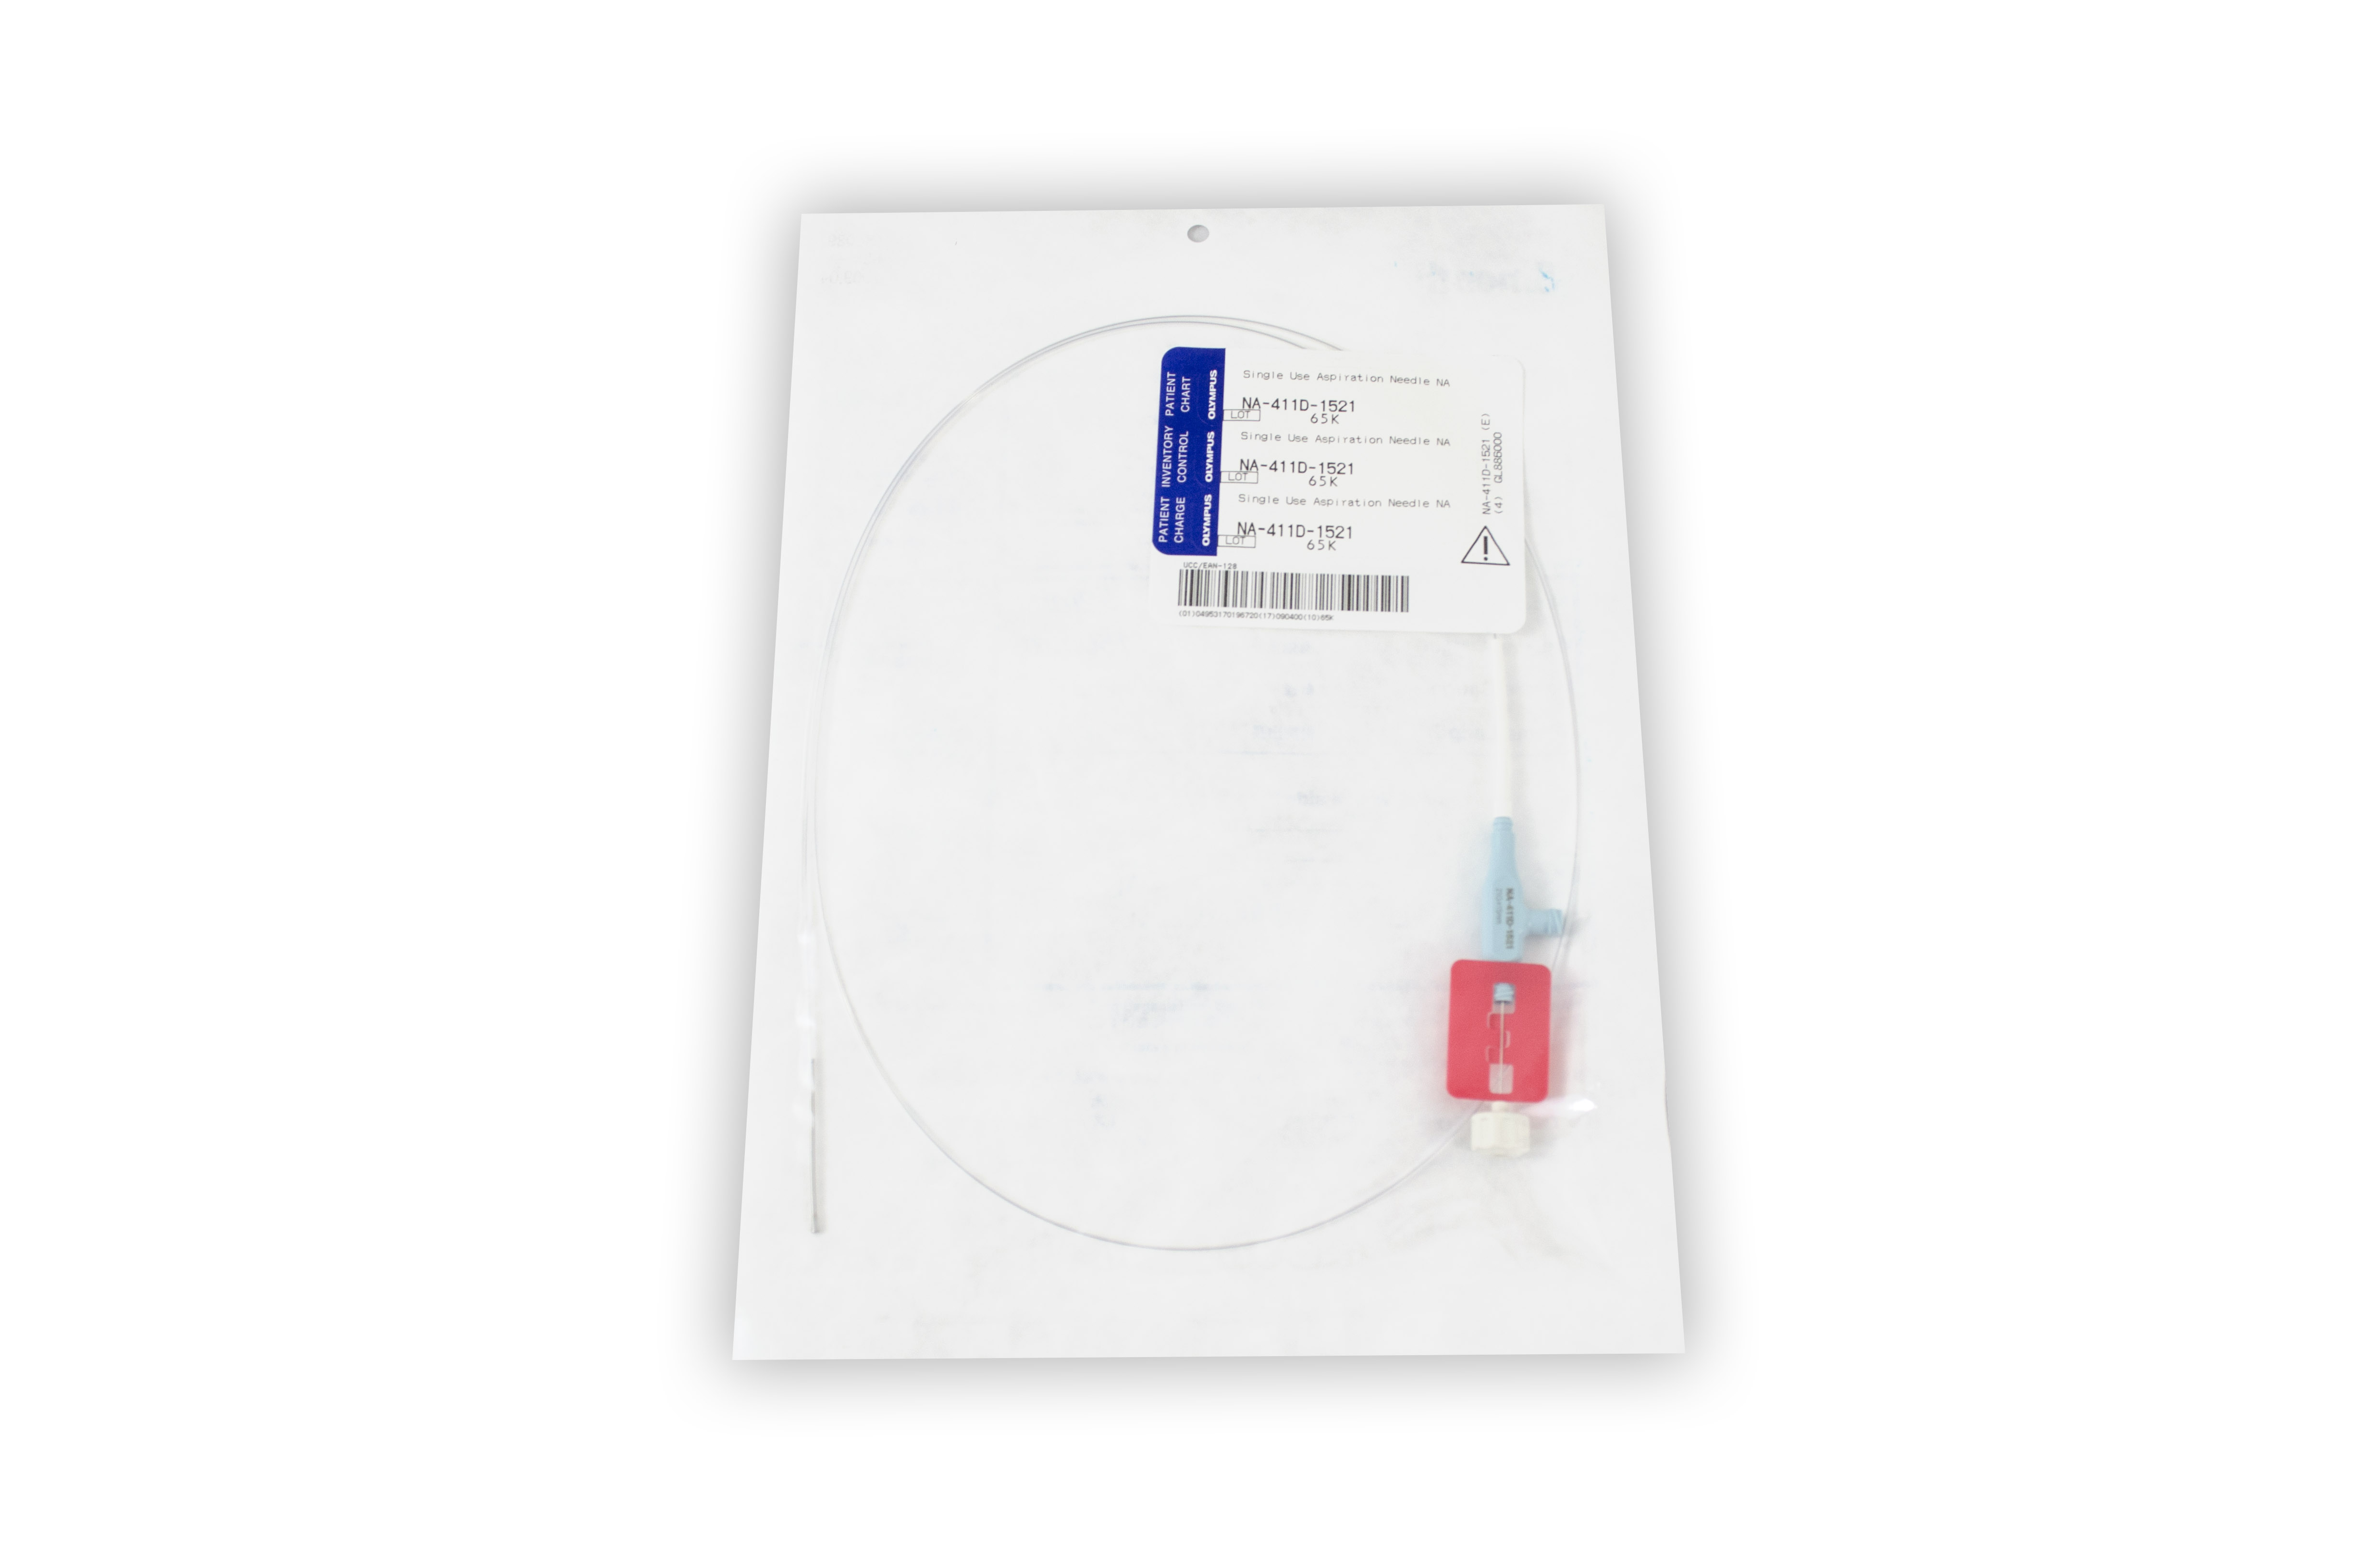 [Out-of-Date] Olympus Disposable Aspiration Needle - NA-411D-1521